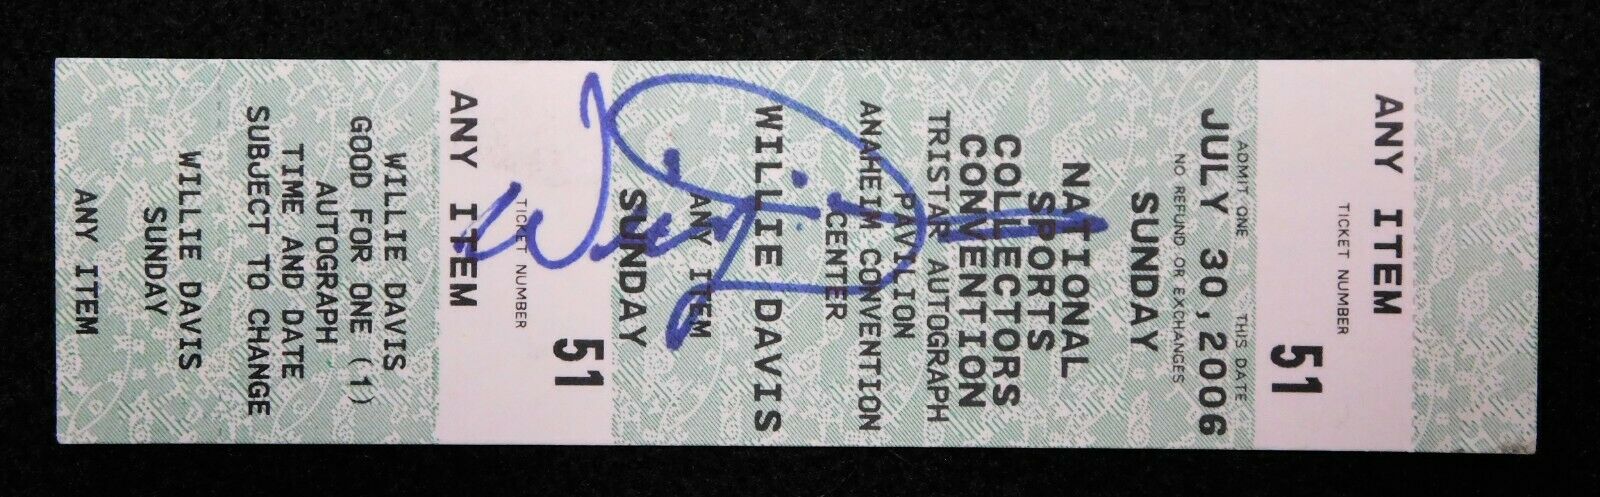 Willie Davis Green Bay Packers Signed Autograph Ticket Jsa Authenticated